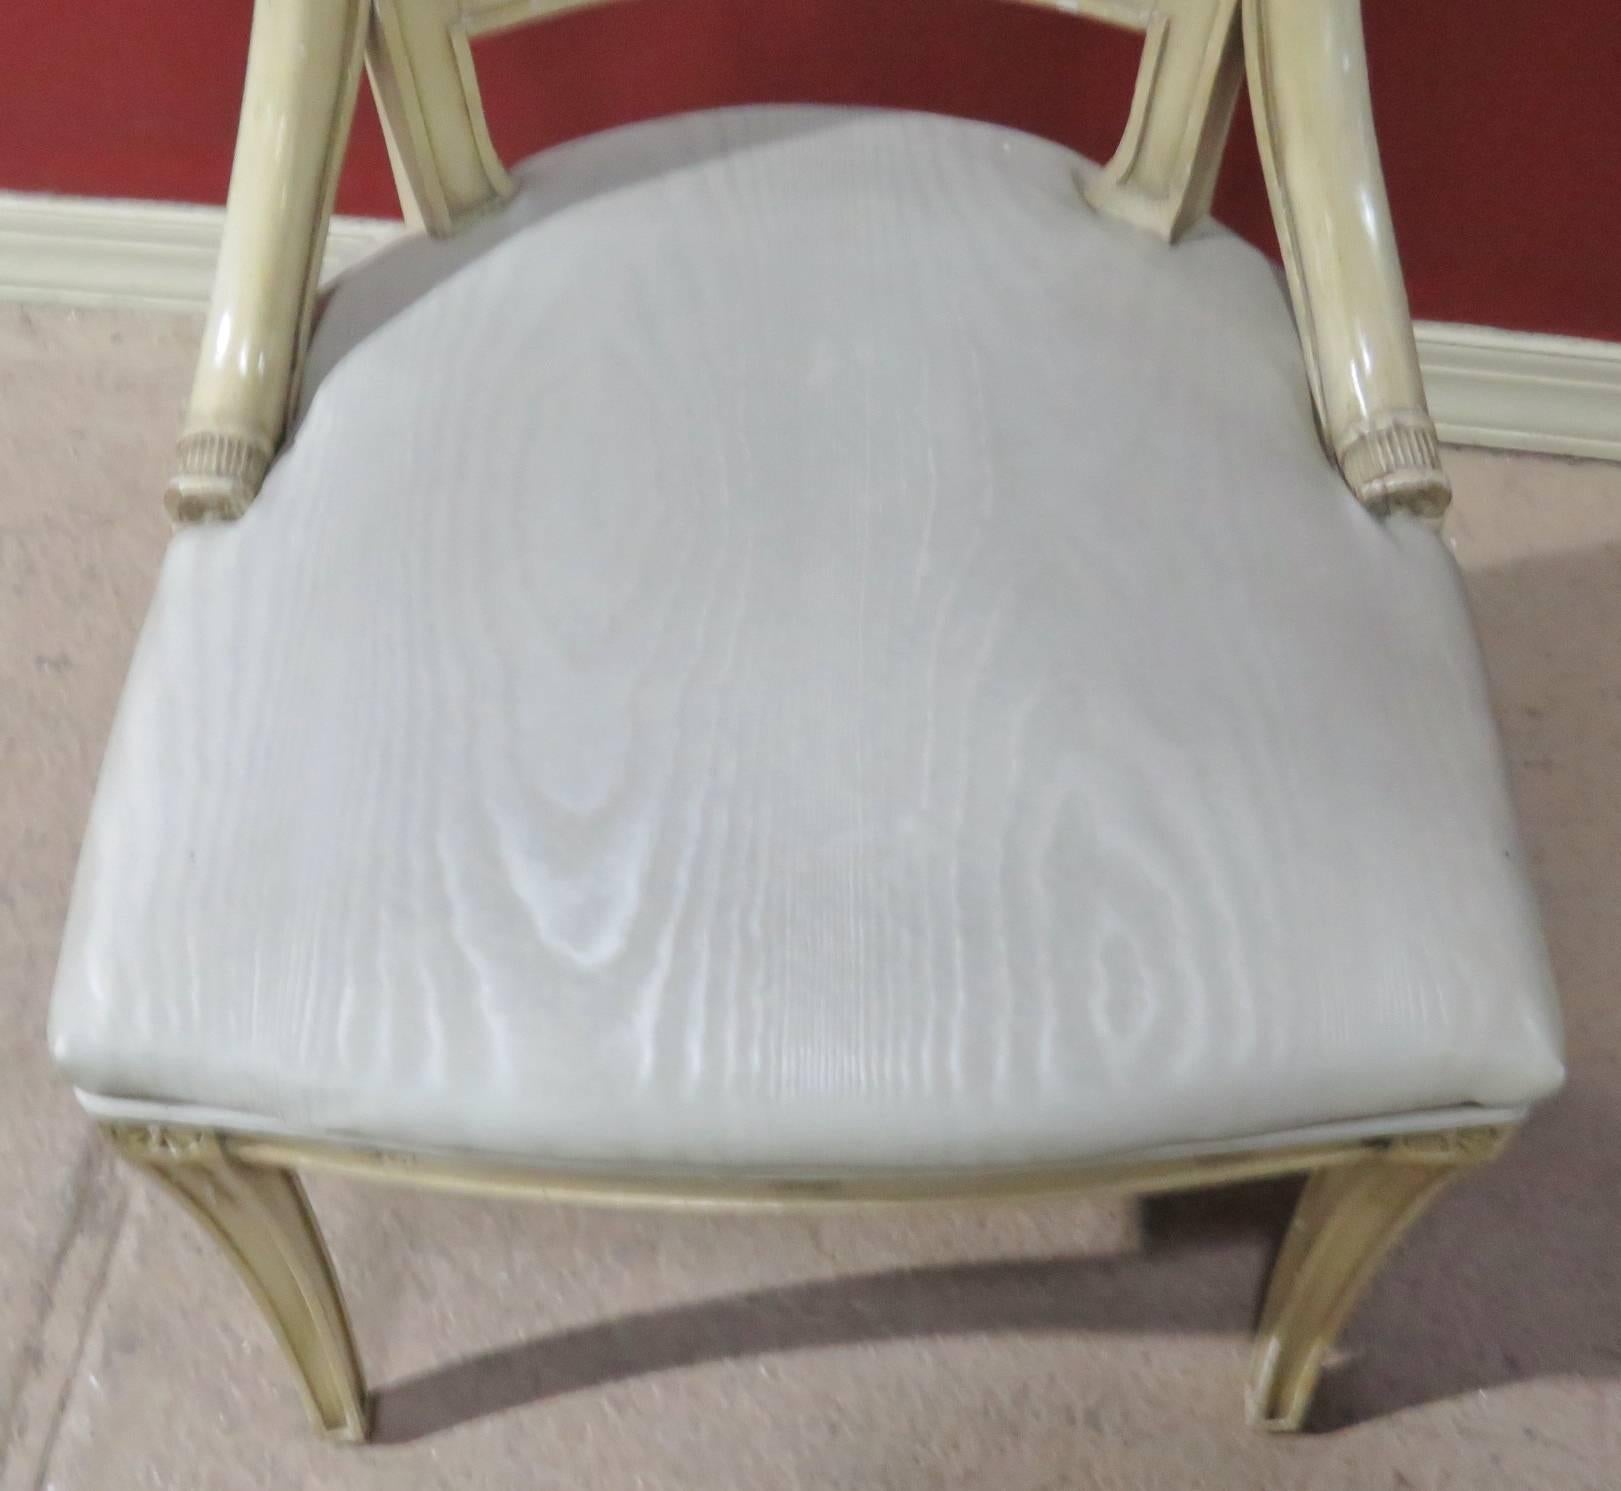 Cream painted frames. Upholstered seat.